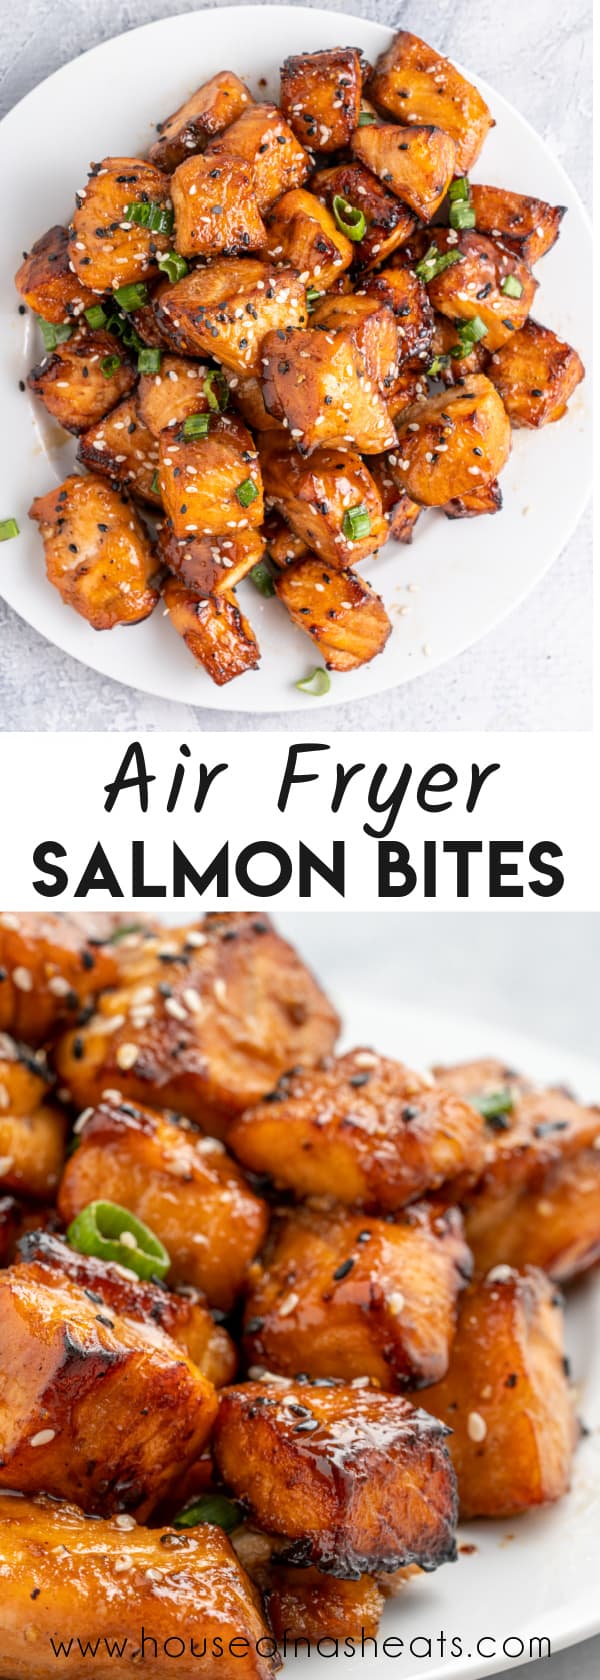 A collage of images of salmon bites with text overlay.